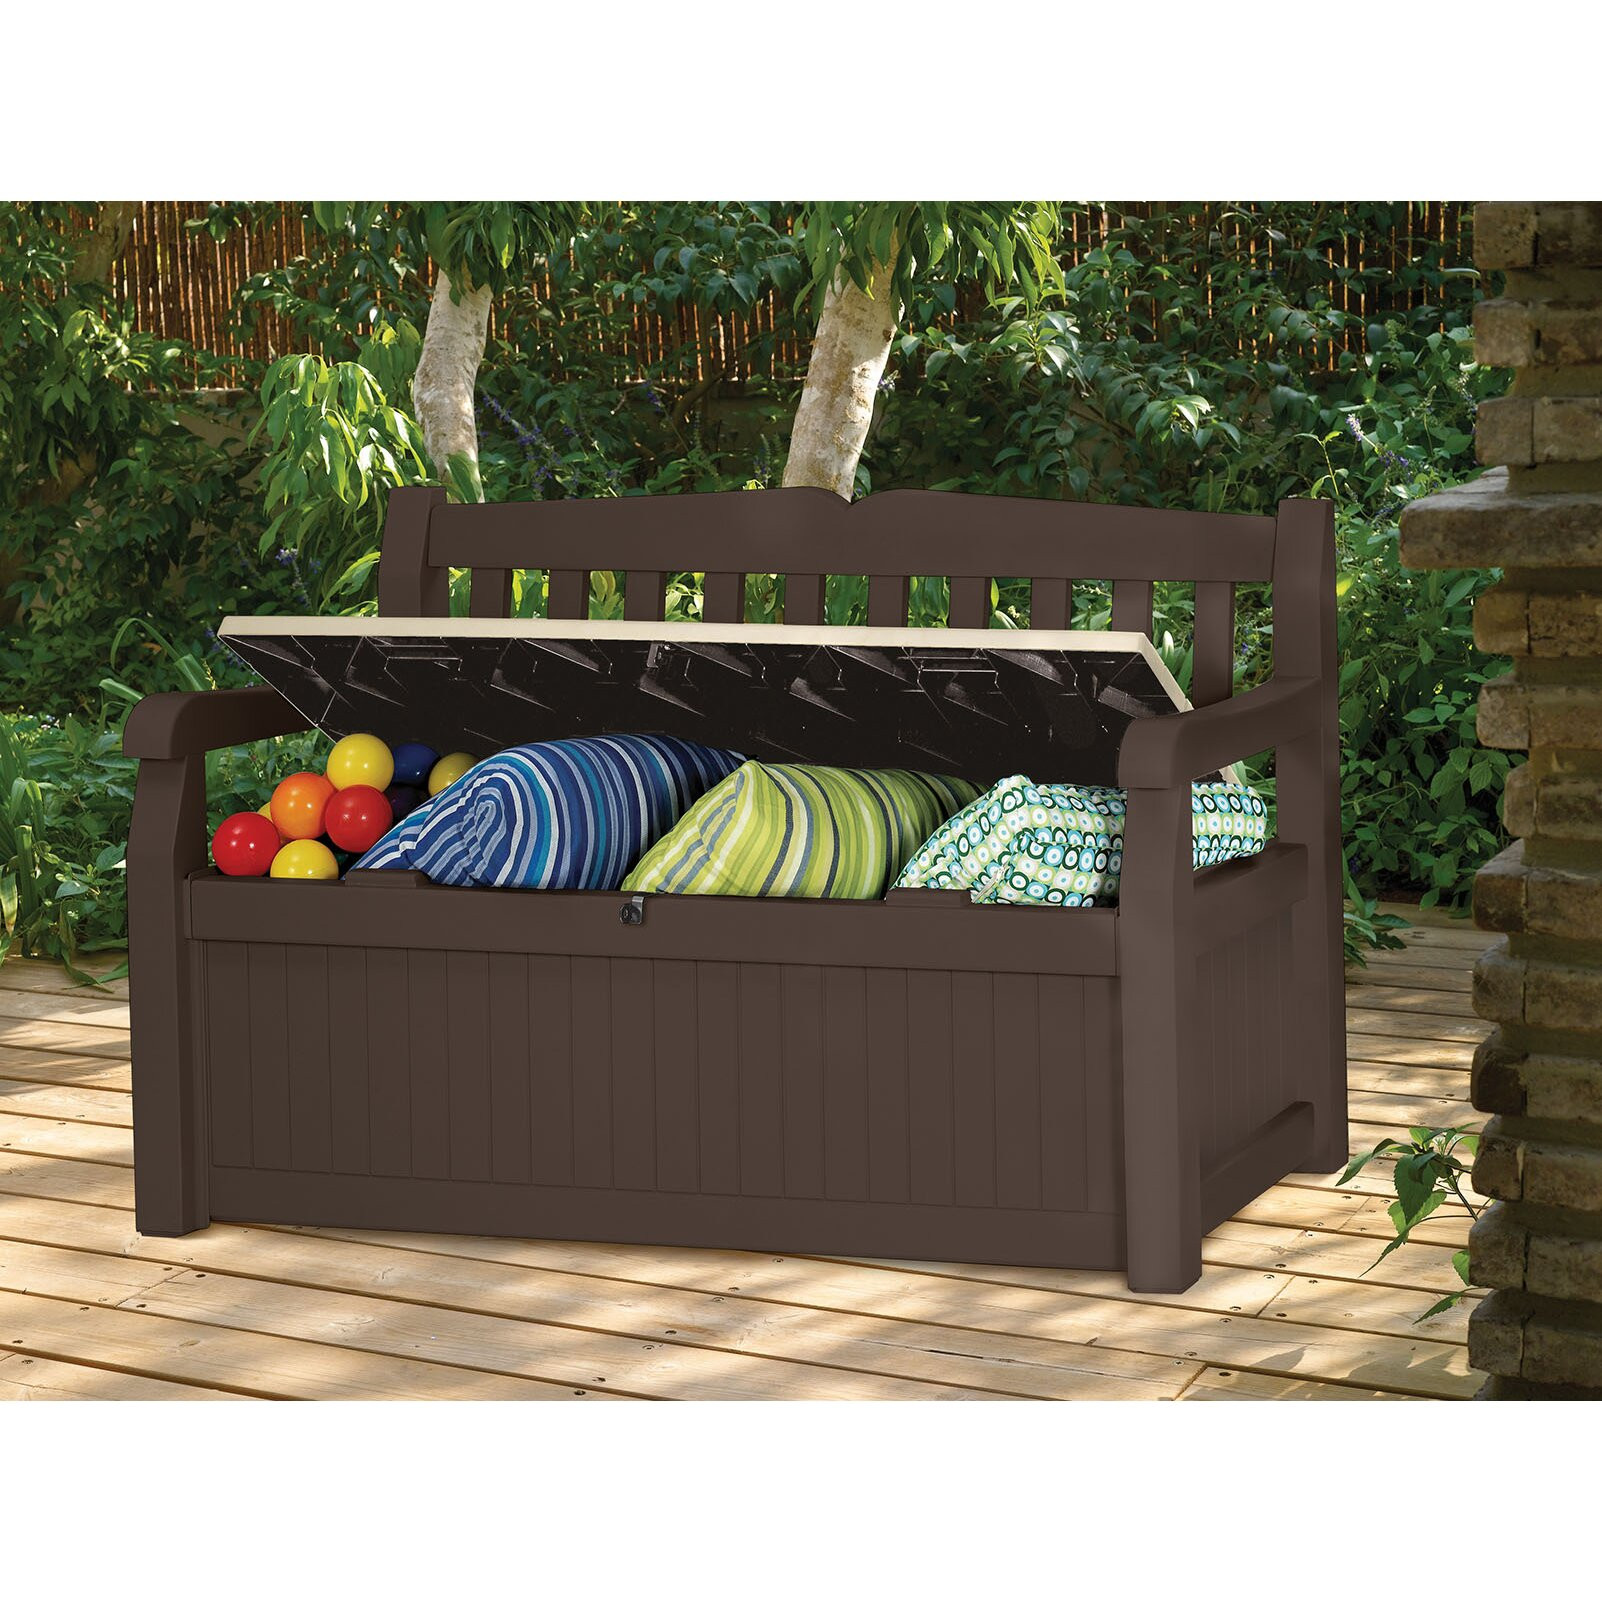 Keter Outdoor Storage Bench
 Keter All Weather Outdoor 70 Gallon Resin Storage Bench